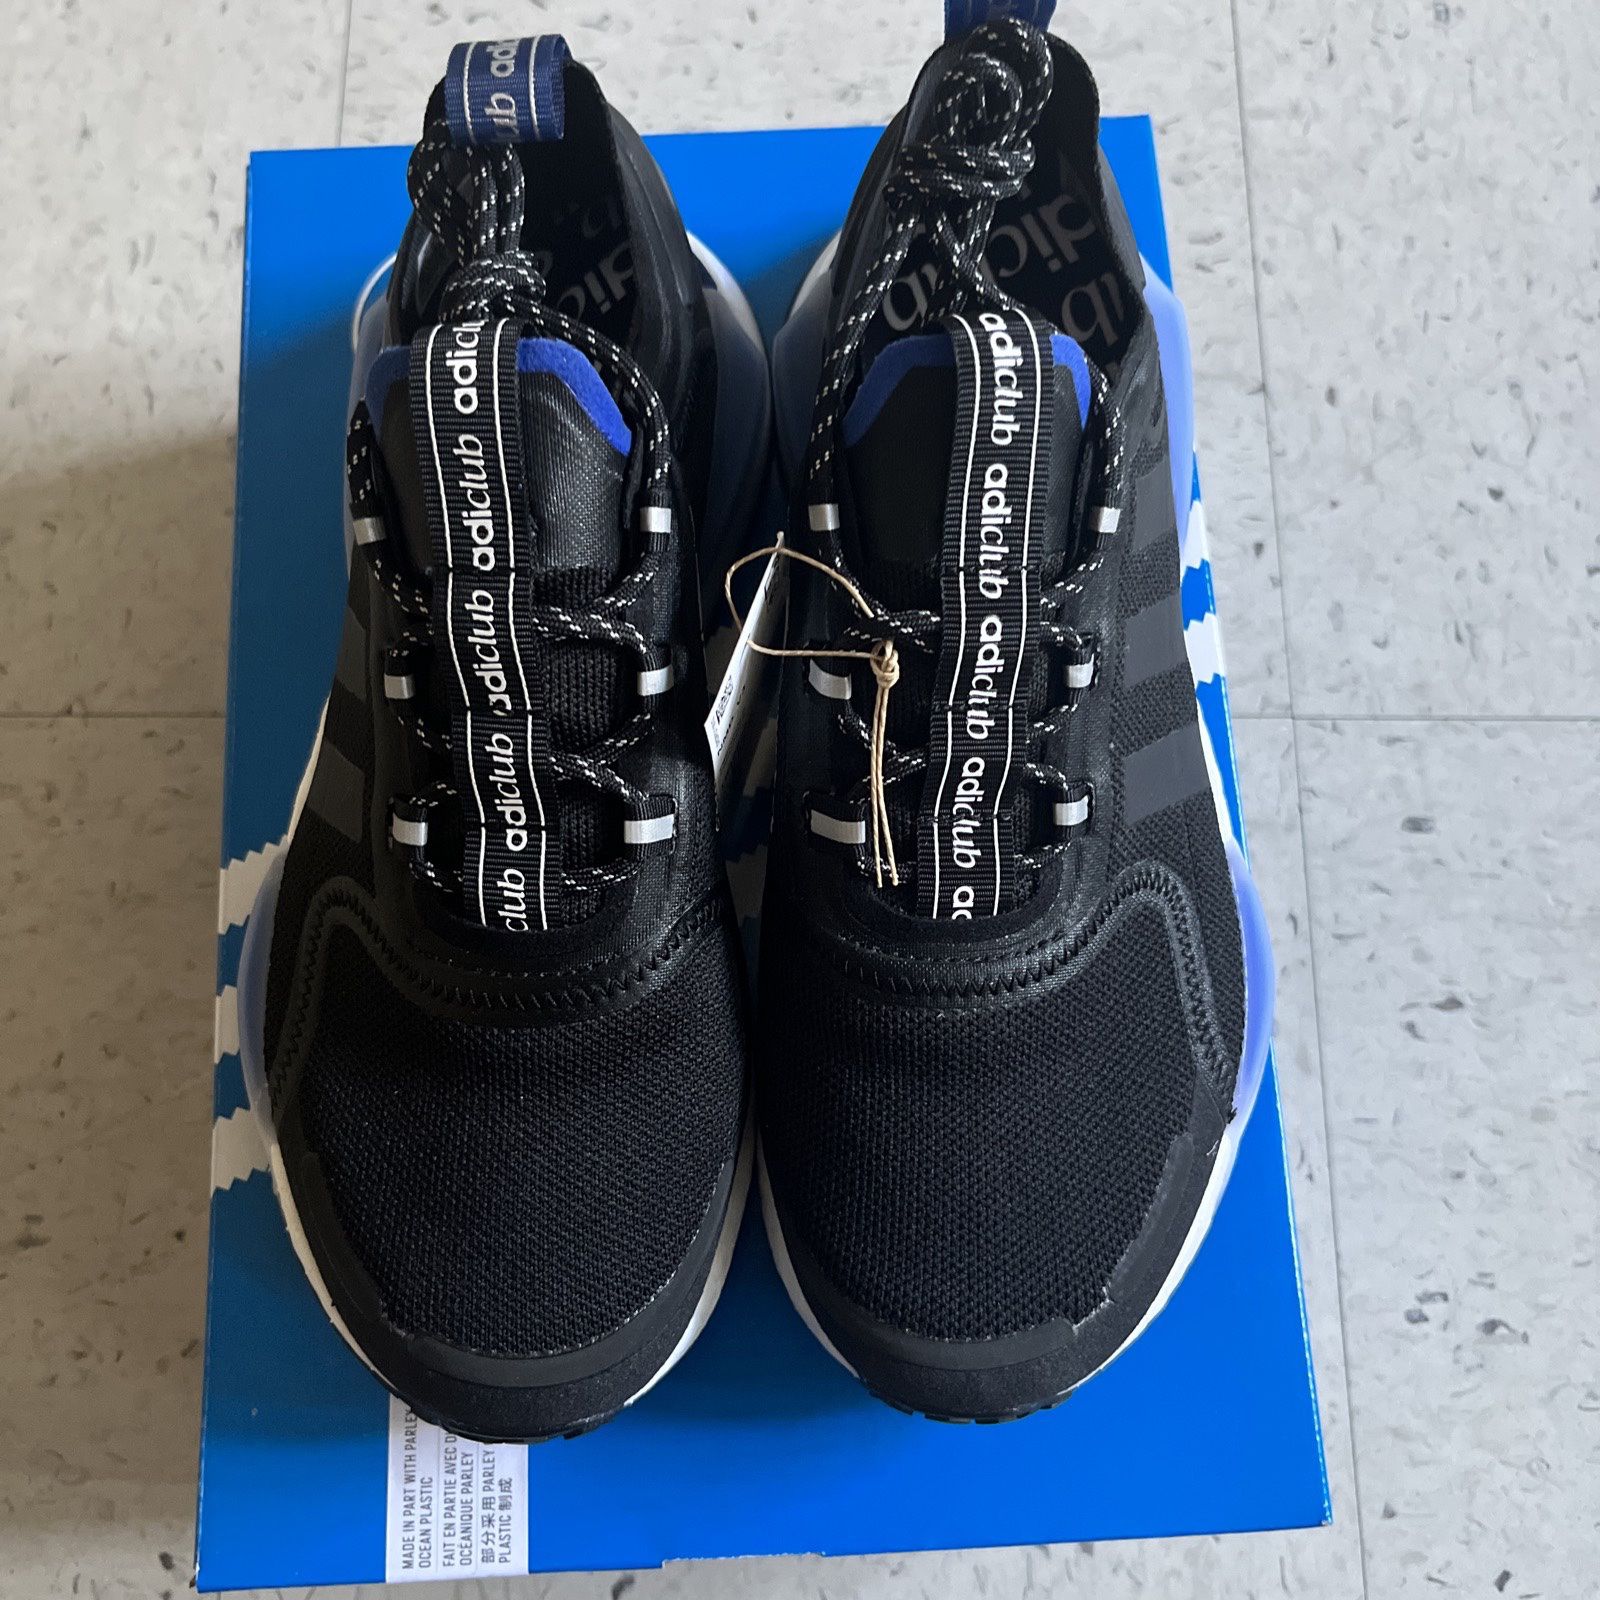 Adidas NMD R1 V3 BOOST Royal Blue Black Core White Royal Blue US ( UK 6) for Sale in The Bronx, NY - OfferUp